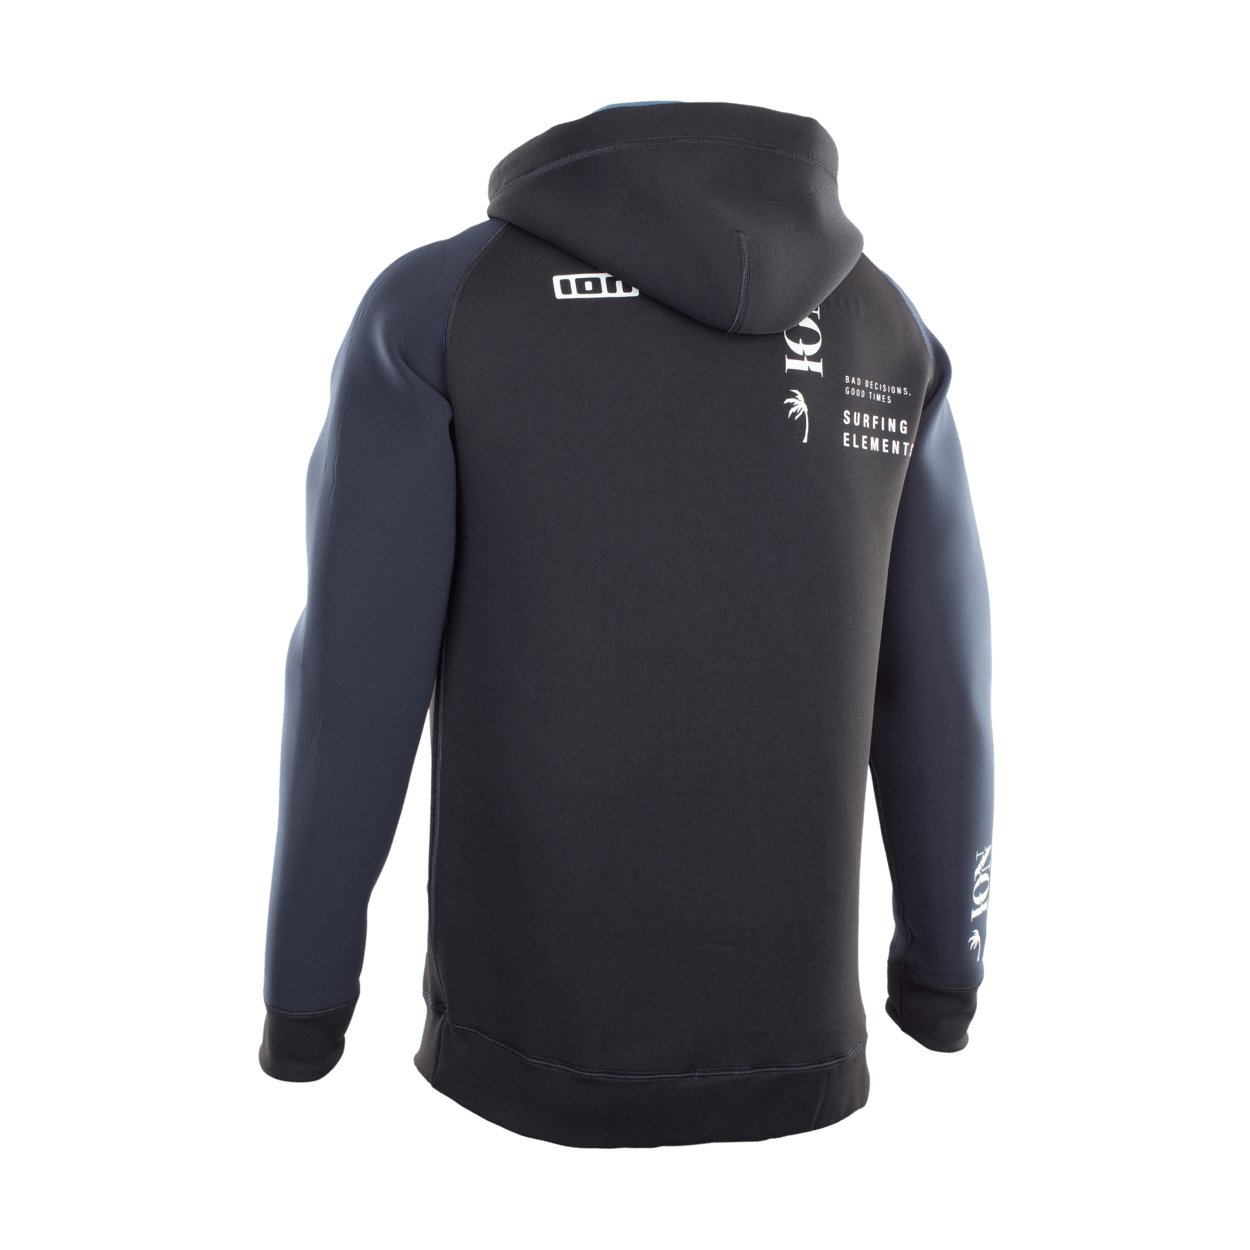 ION Neo Hoody 2022 - Worthing Watersports - 9008415955244 - Tops - ION Water